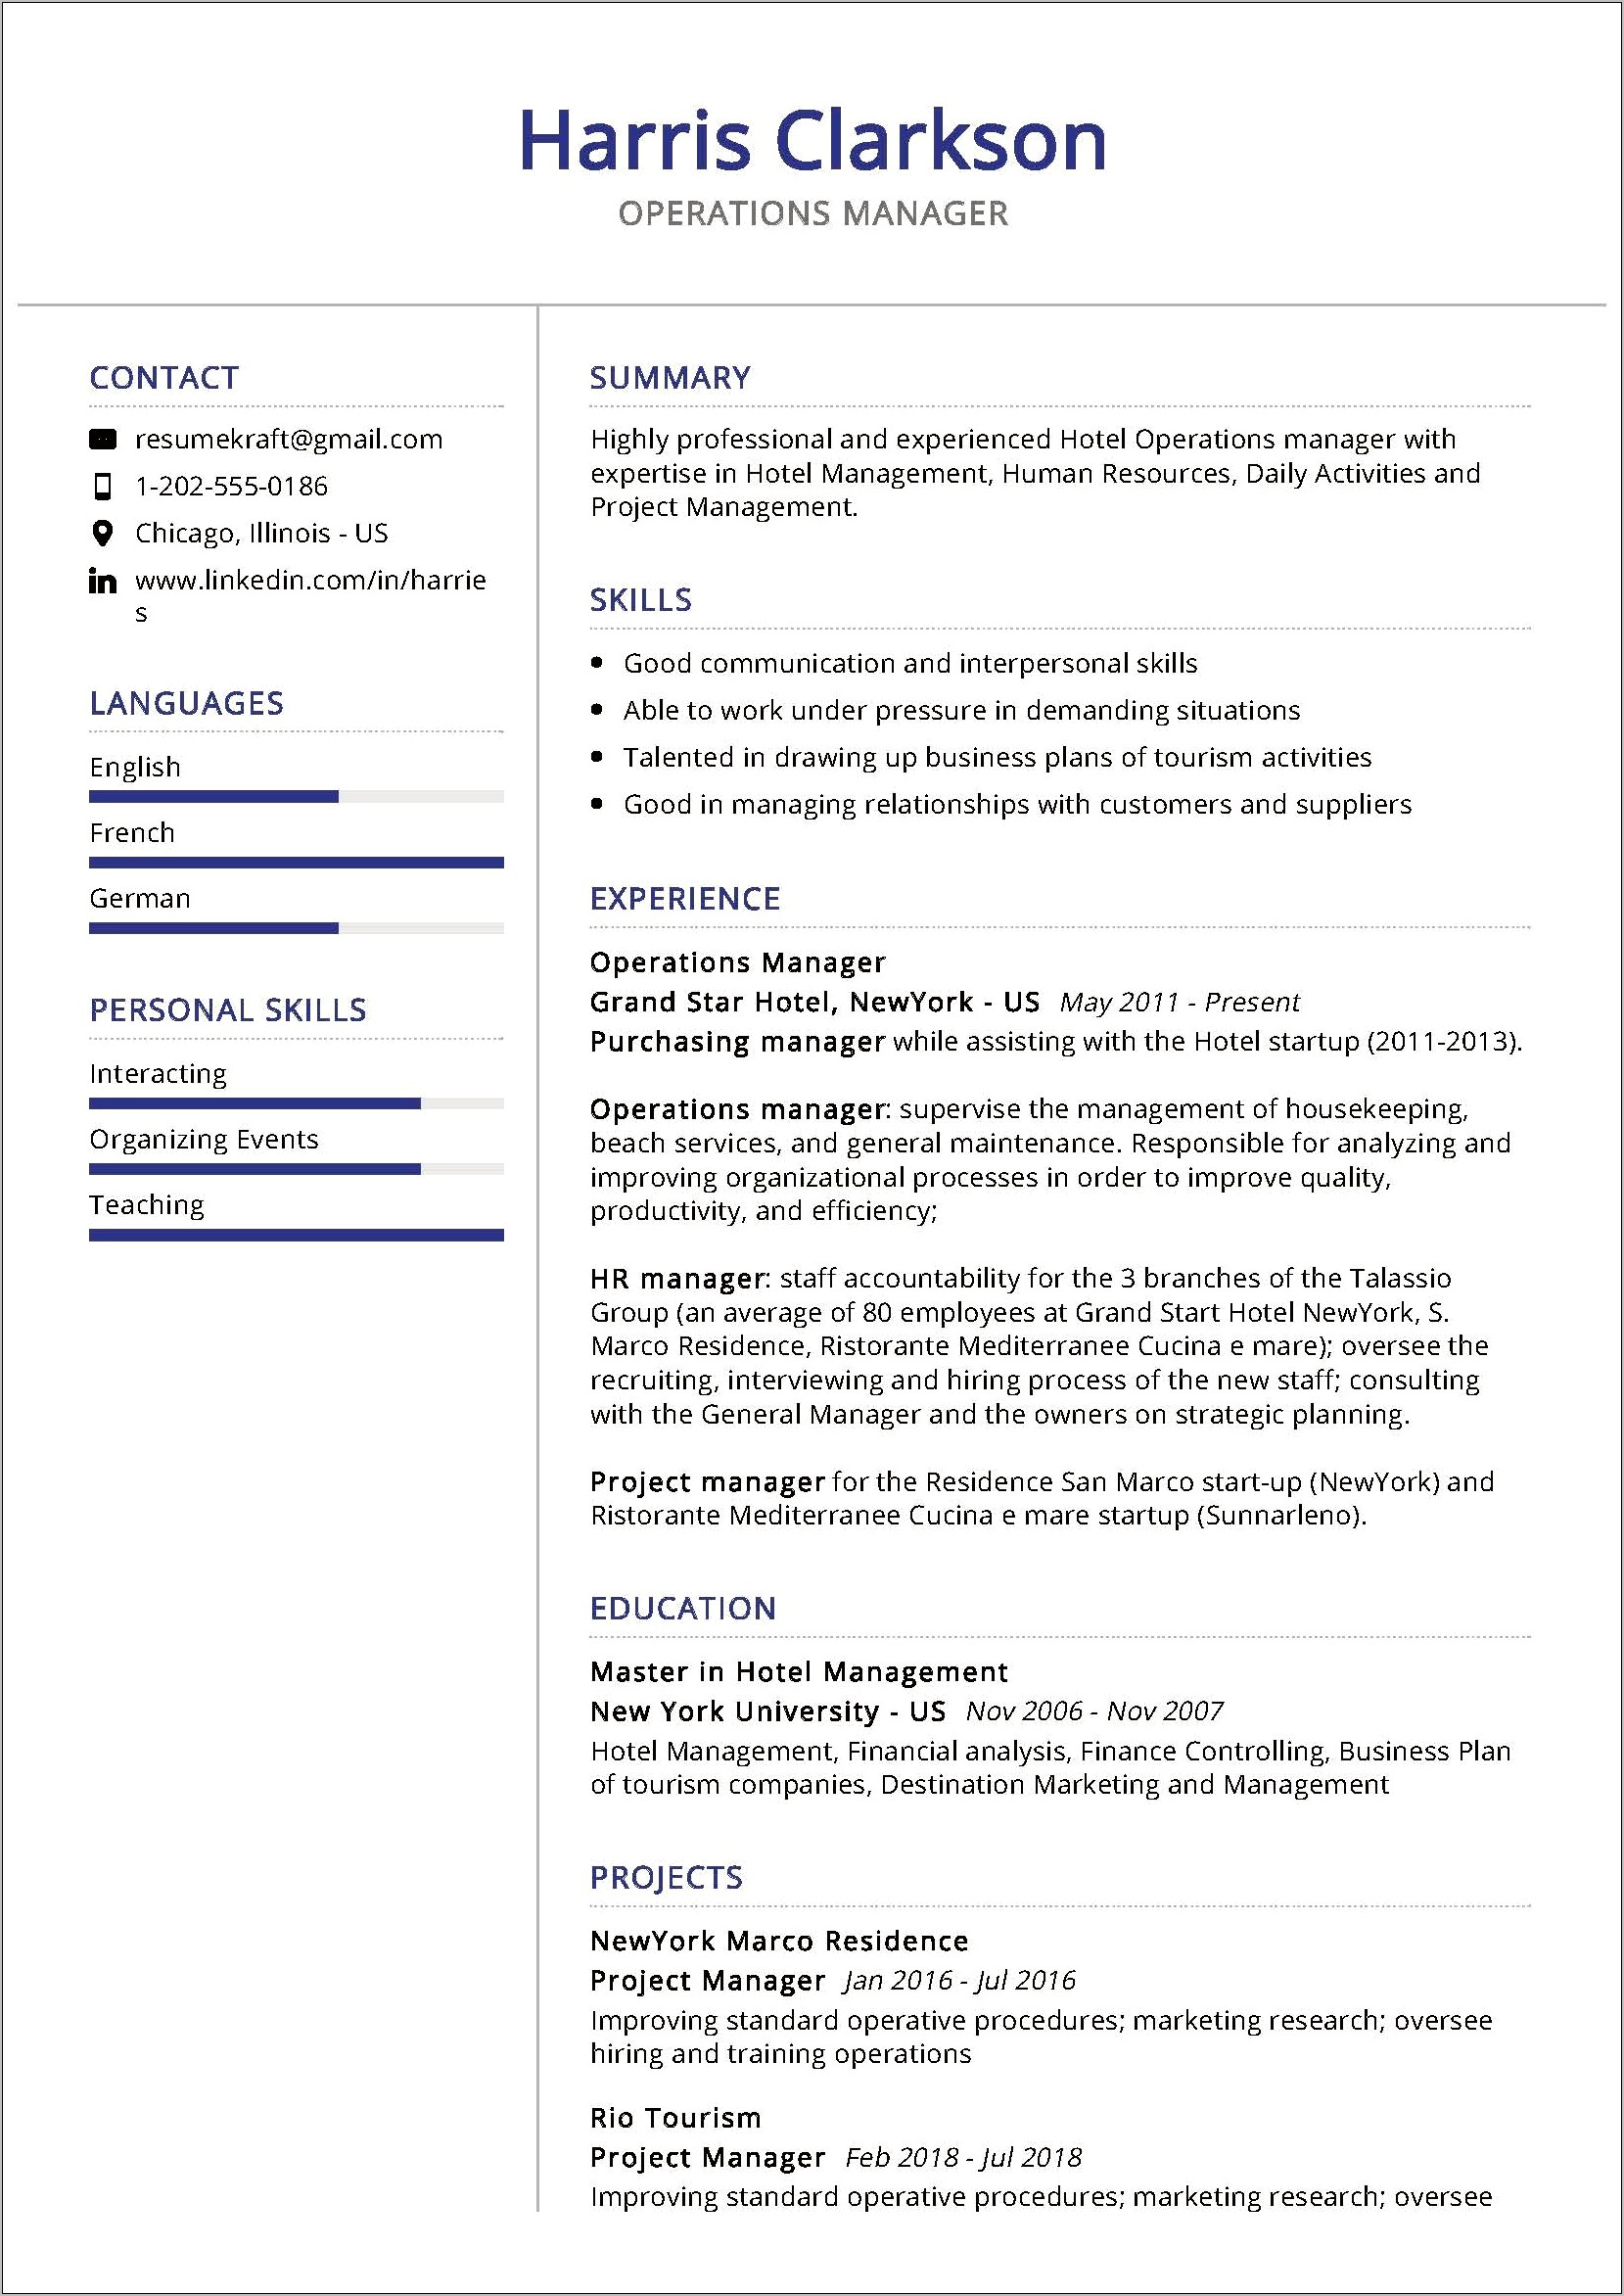 Operations Manager Job Responsibilities Resume